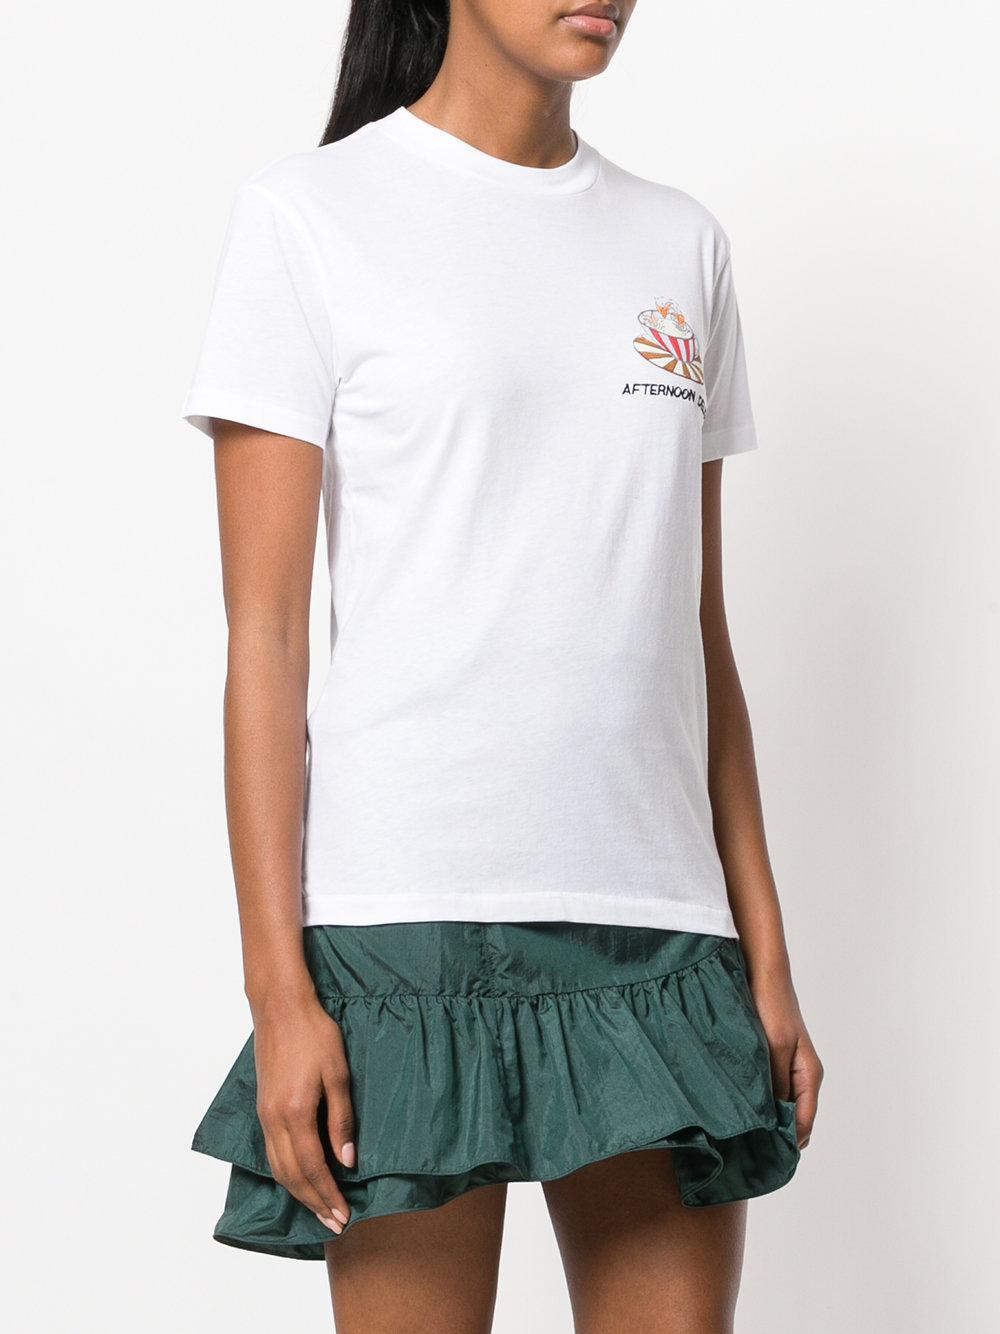 Ganni Cotton Afternoon Delight T-shirt in White - Lyst